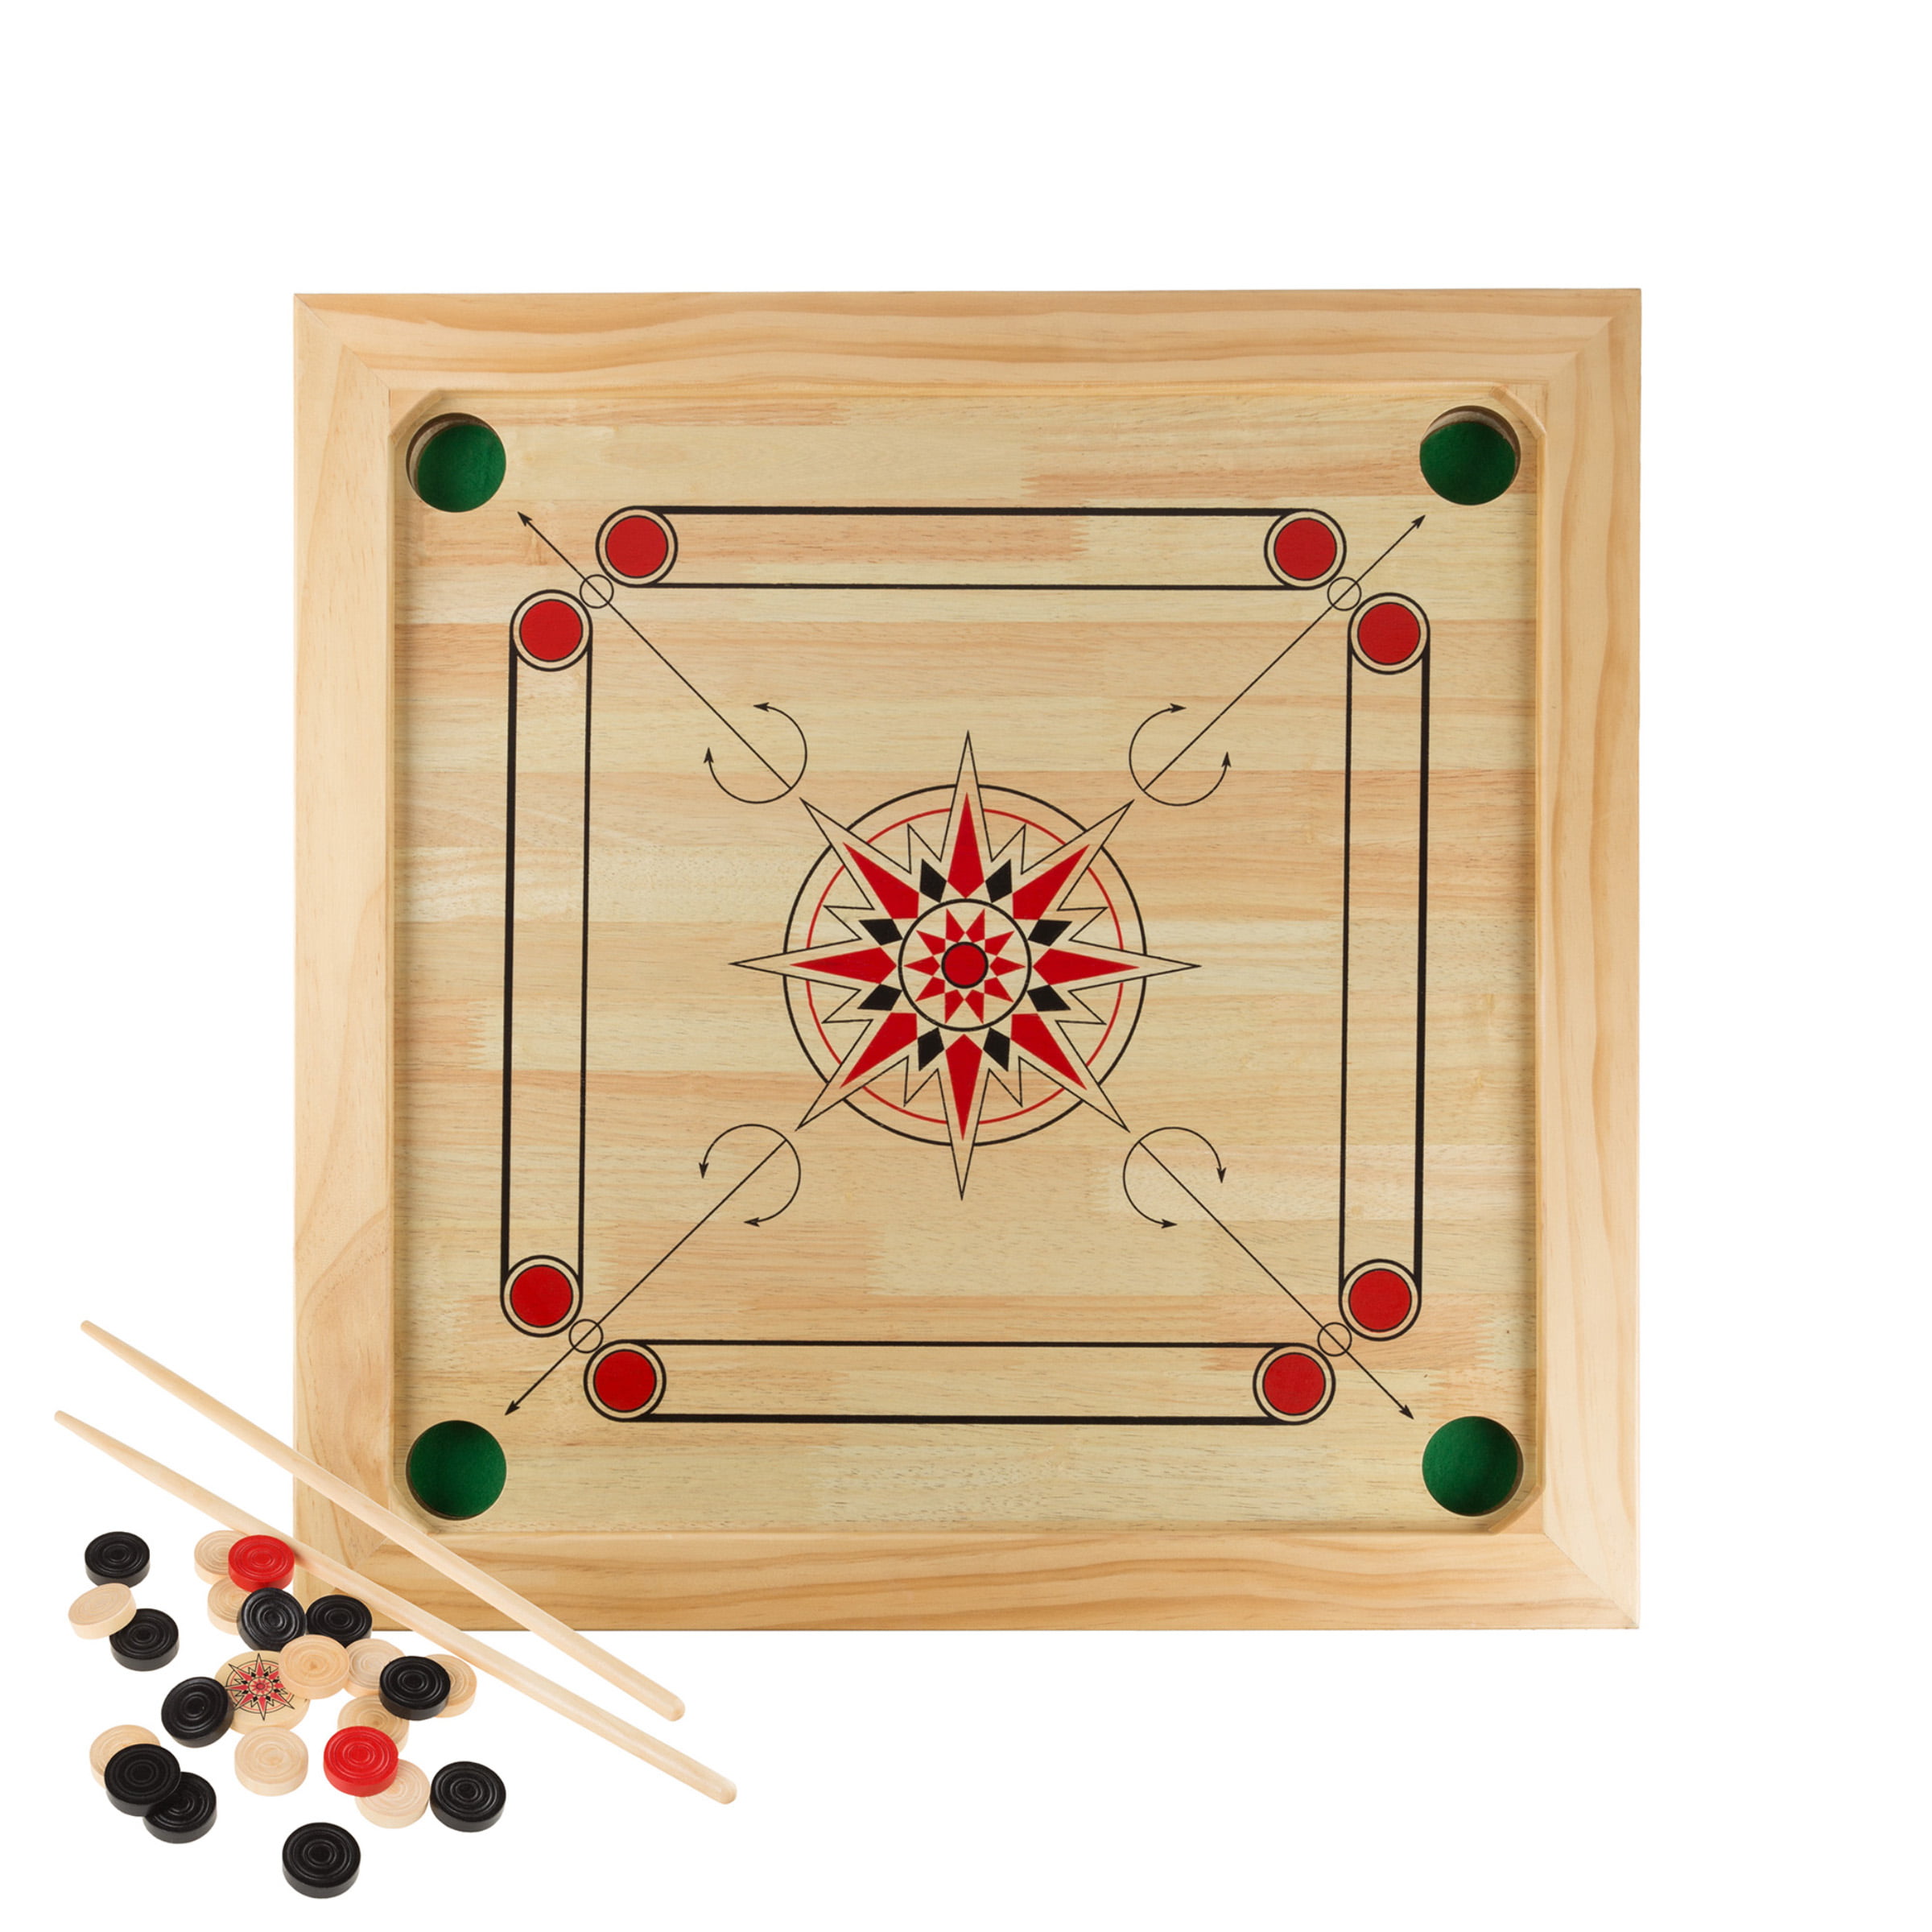 Brand New Full Size Carrom Board 32x32 w/ coins & 2 strikers Ships from USA 